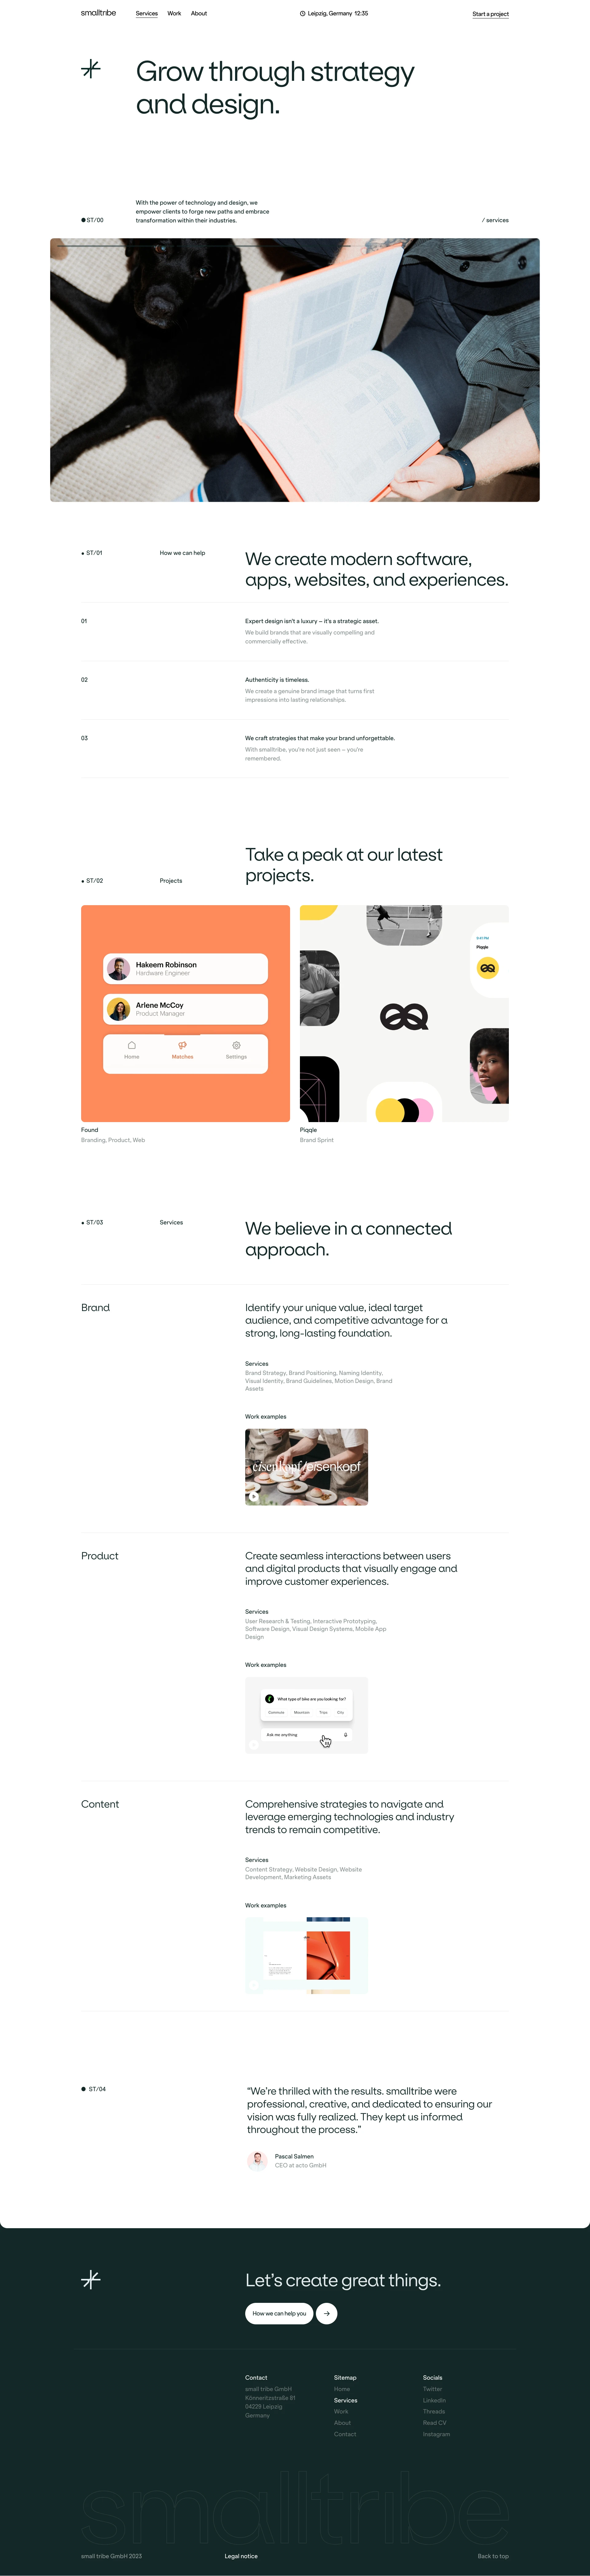 smalltribe Landing Page Example: smalltribe is a branding and digital design boutique studio that creates products, services, and experiences aimed at making this digital age a little more humane.